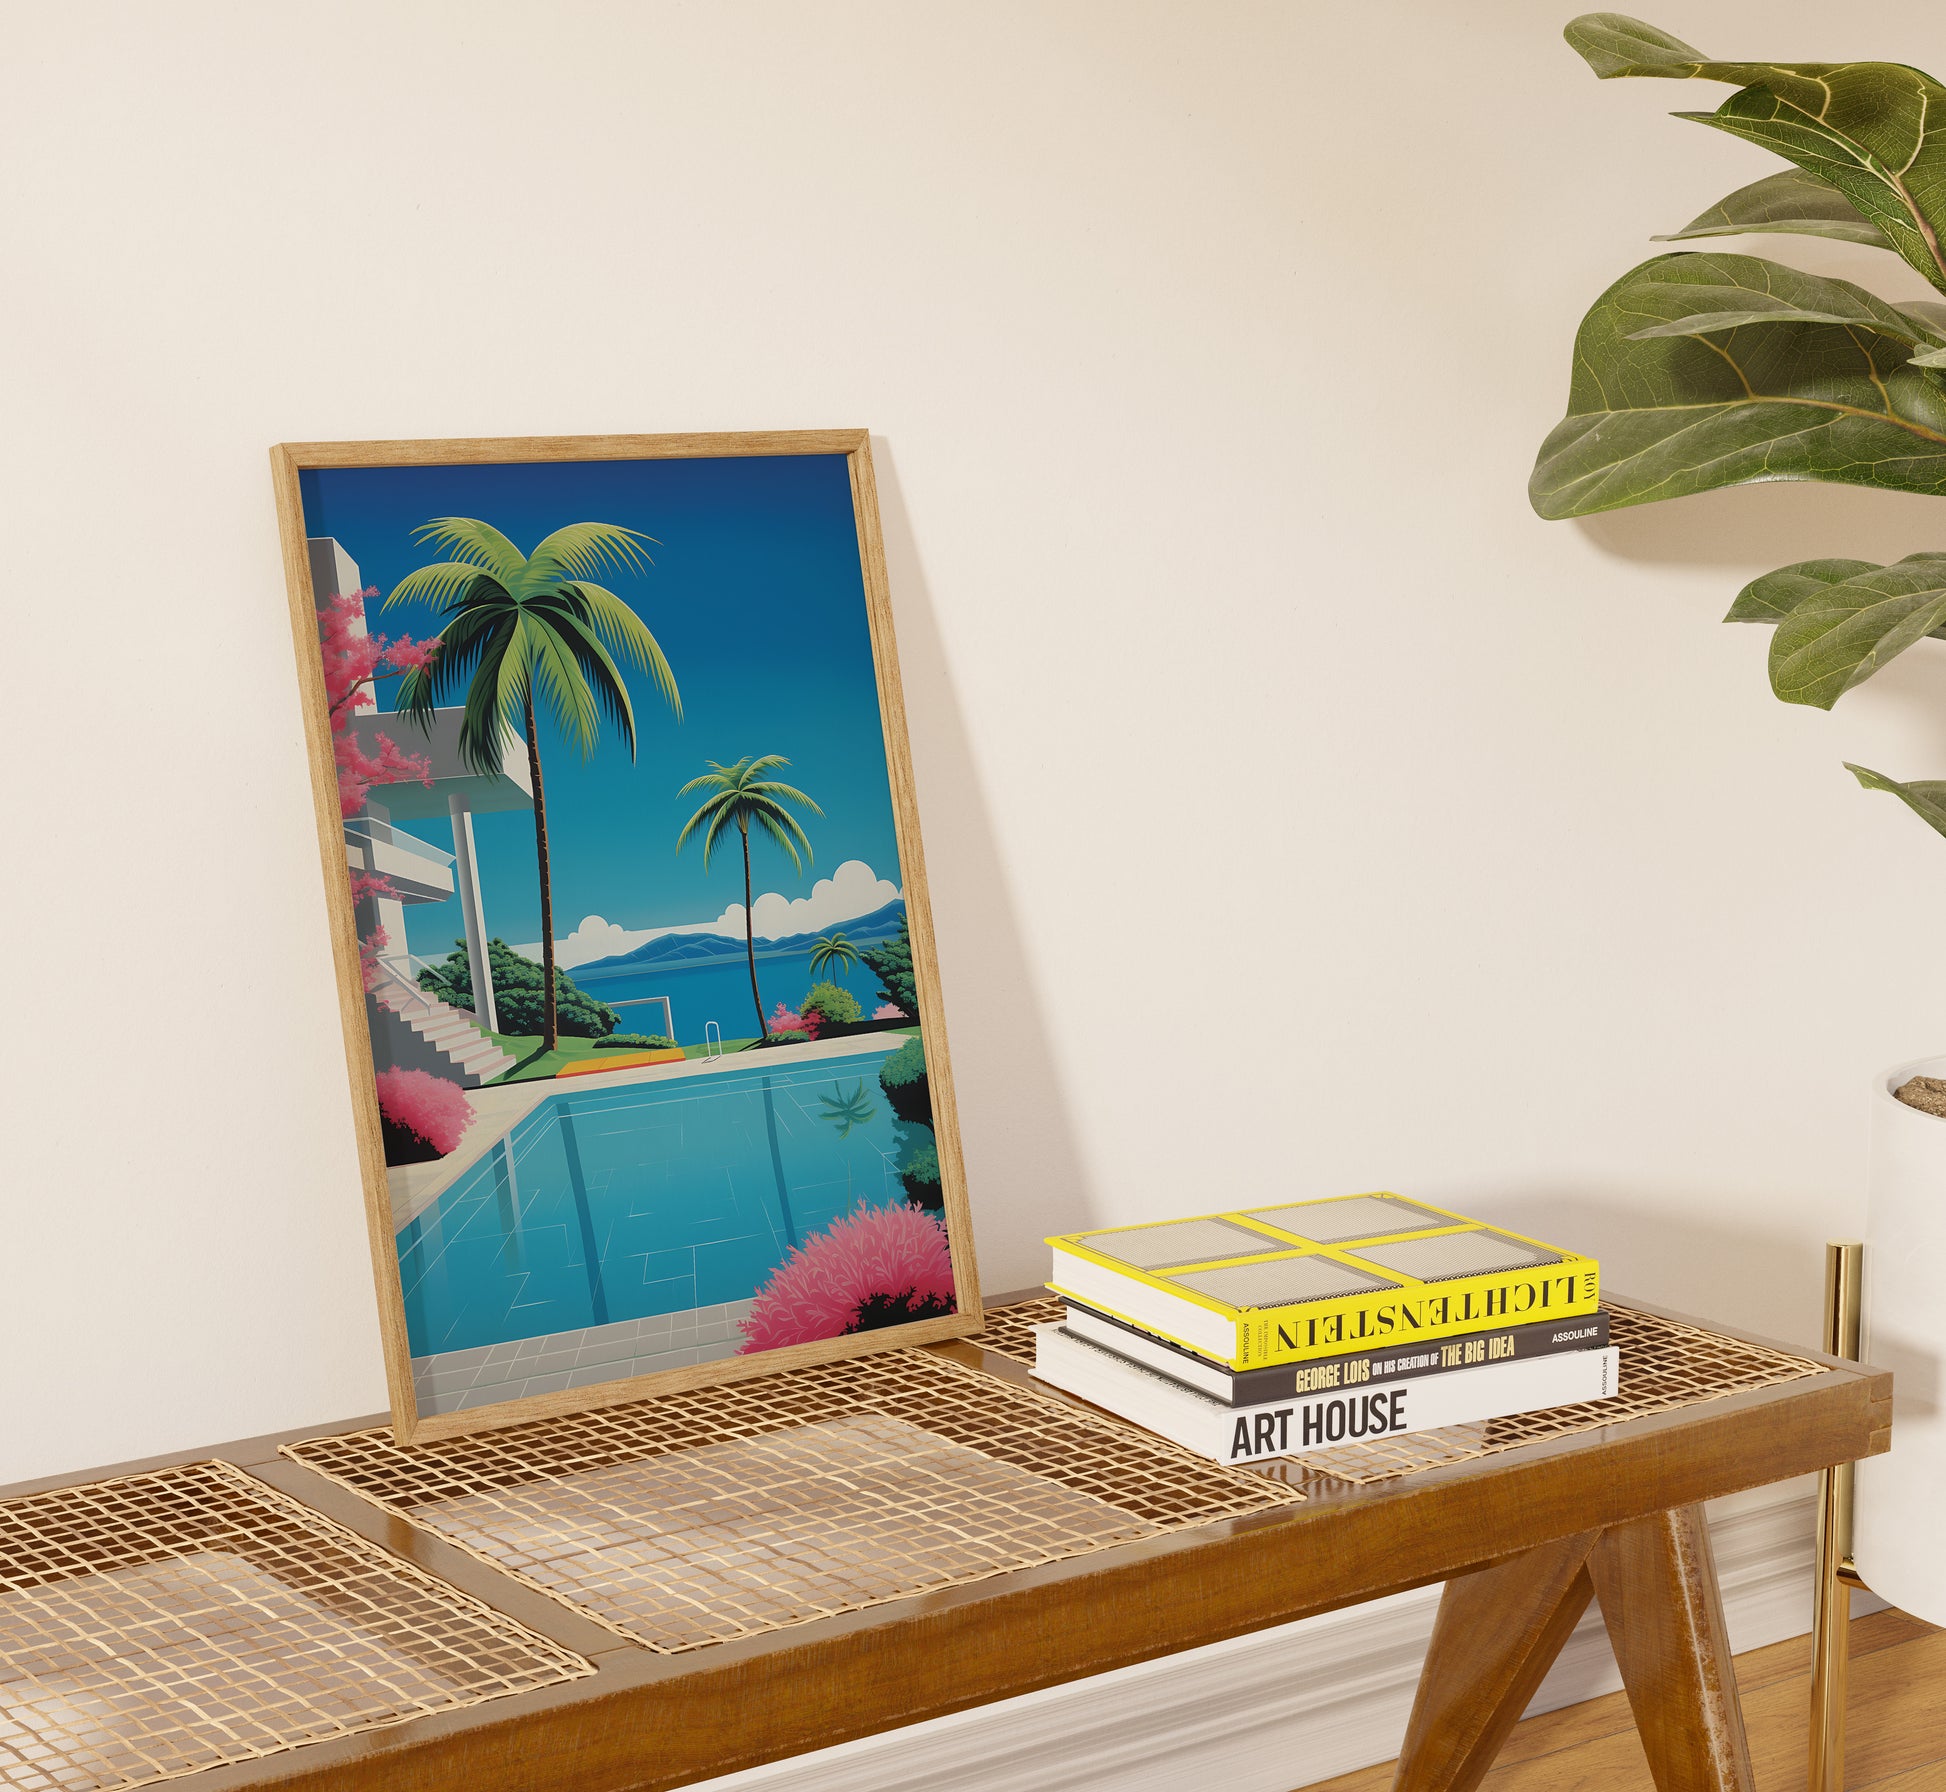 A framed tropical landscape poster next to books on a woven table, with a plant nearby.